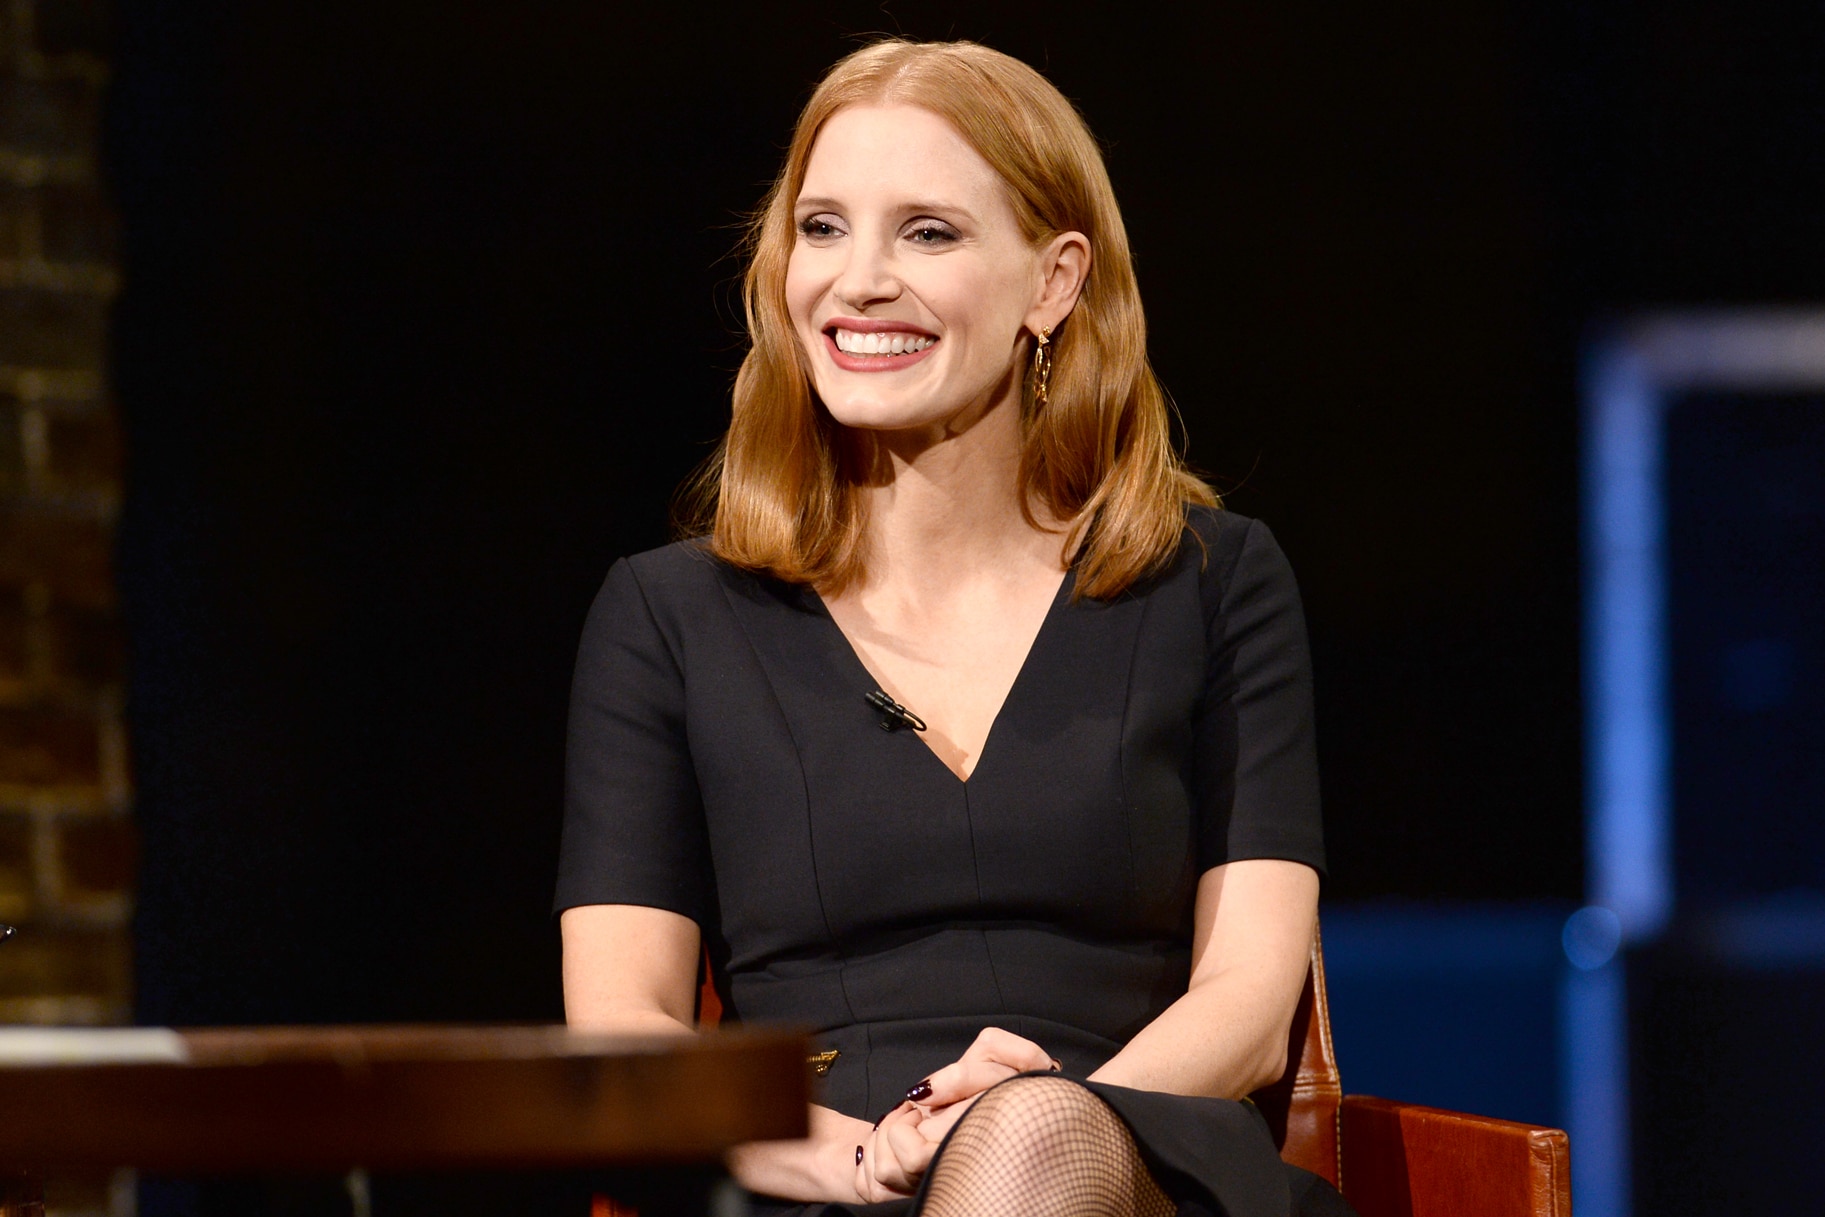 Watch Ep 1: Jessica Chastain | Inside the Actors Studio